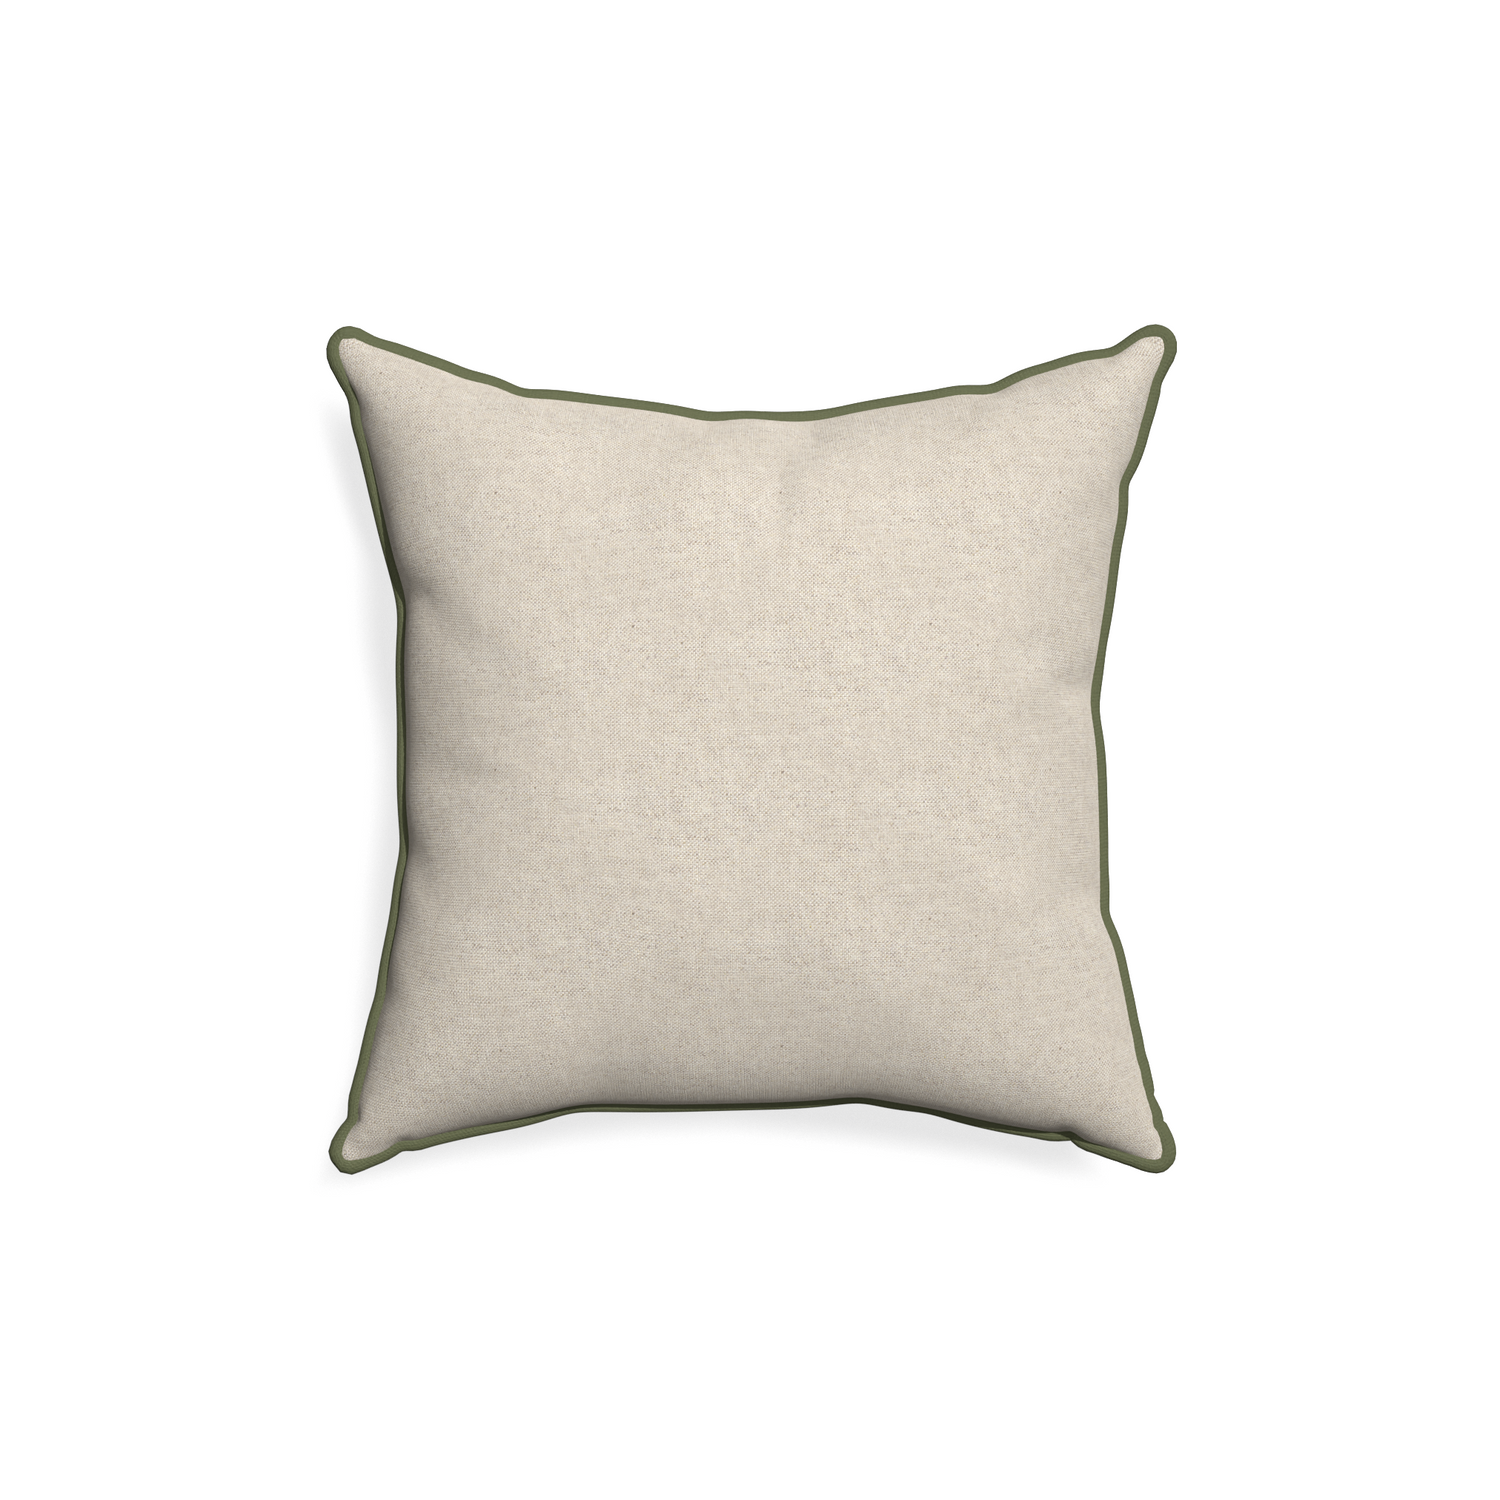 18-square oat custom light brownpillow with f piping on white background